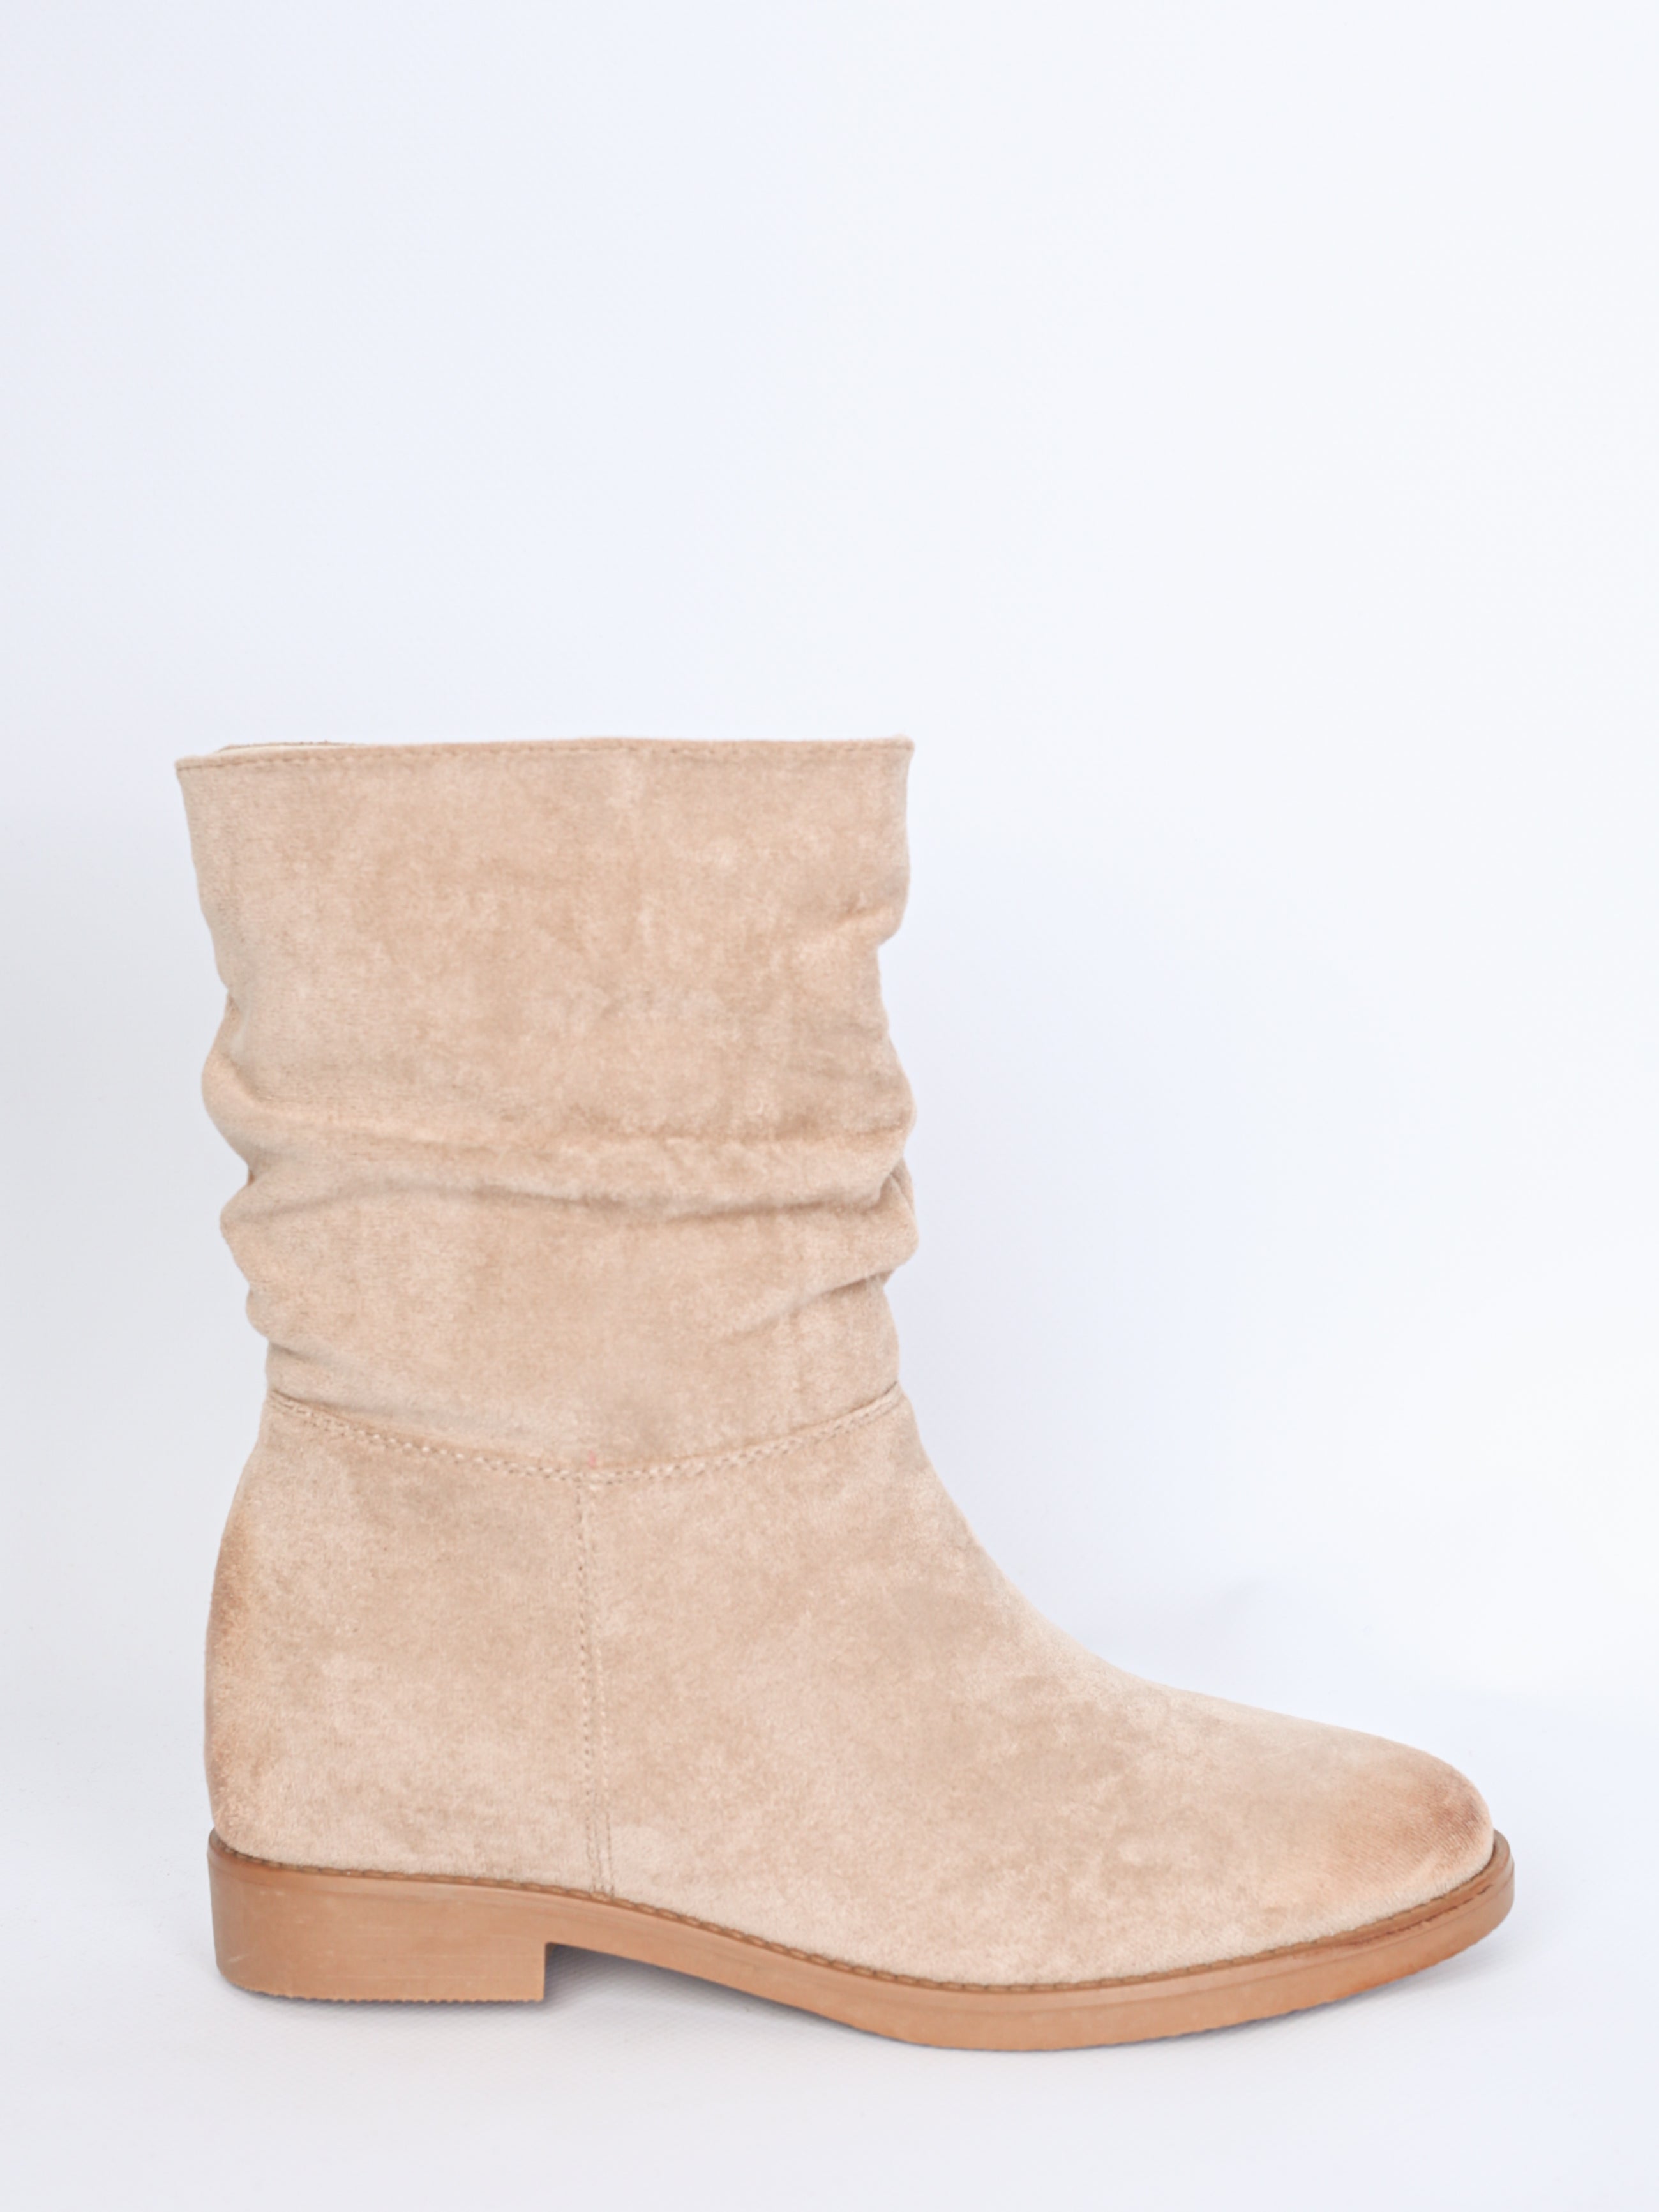 Boots with wrinkle detail